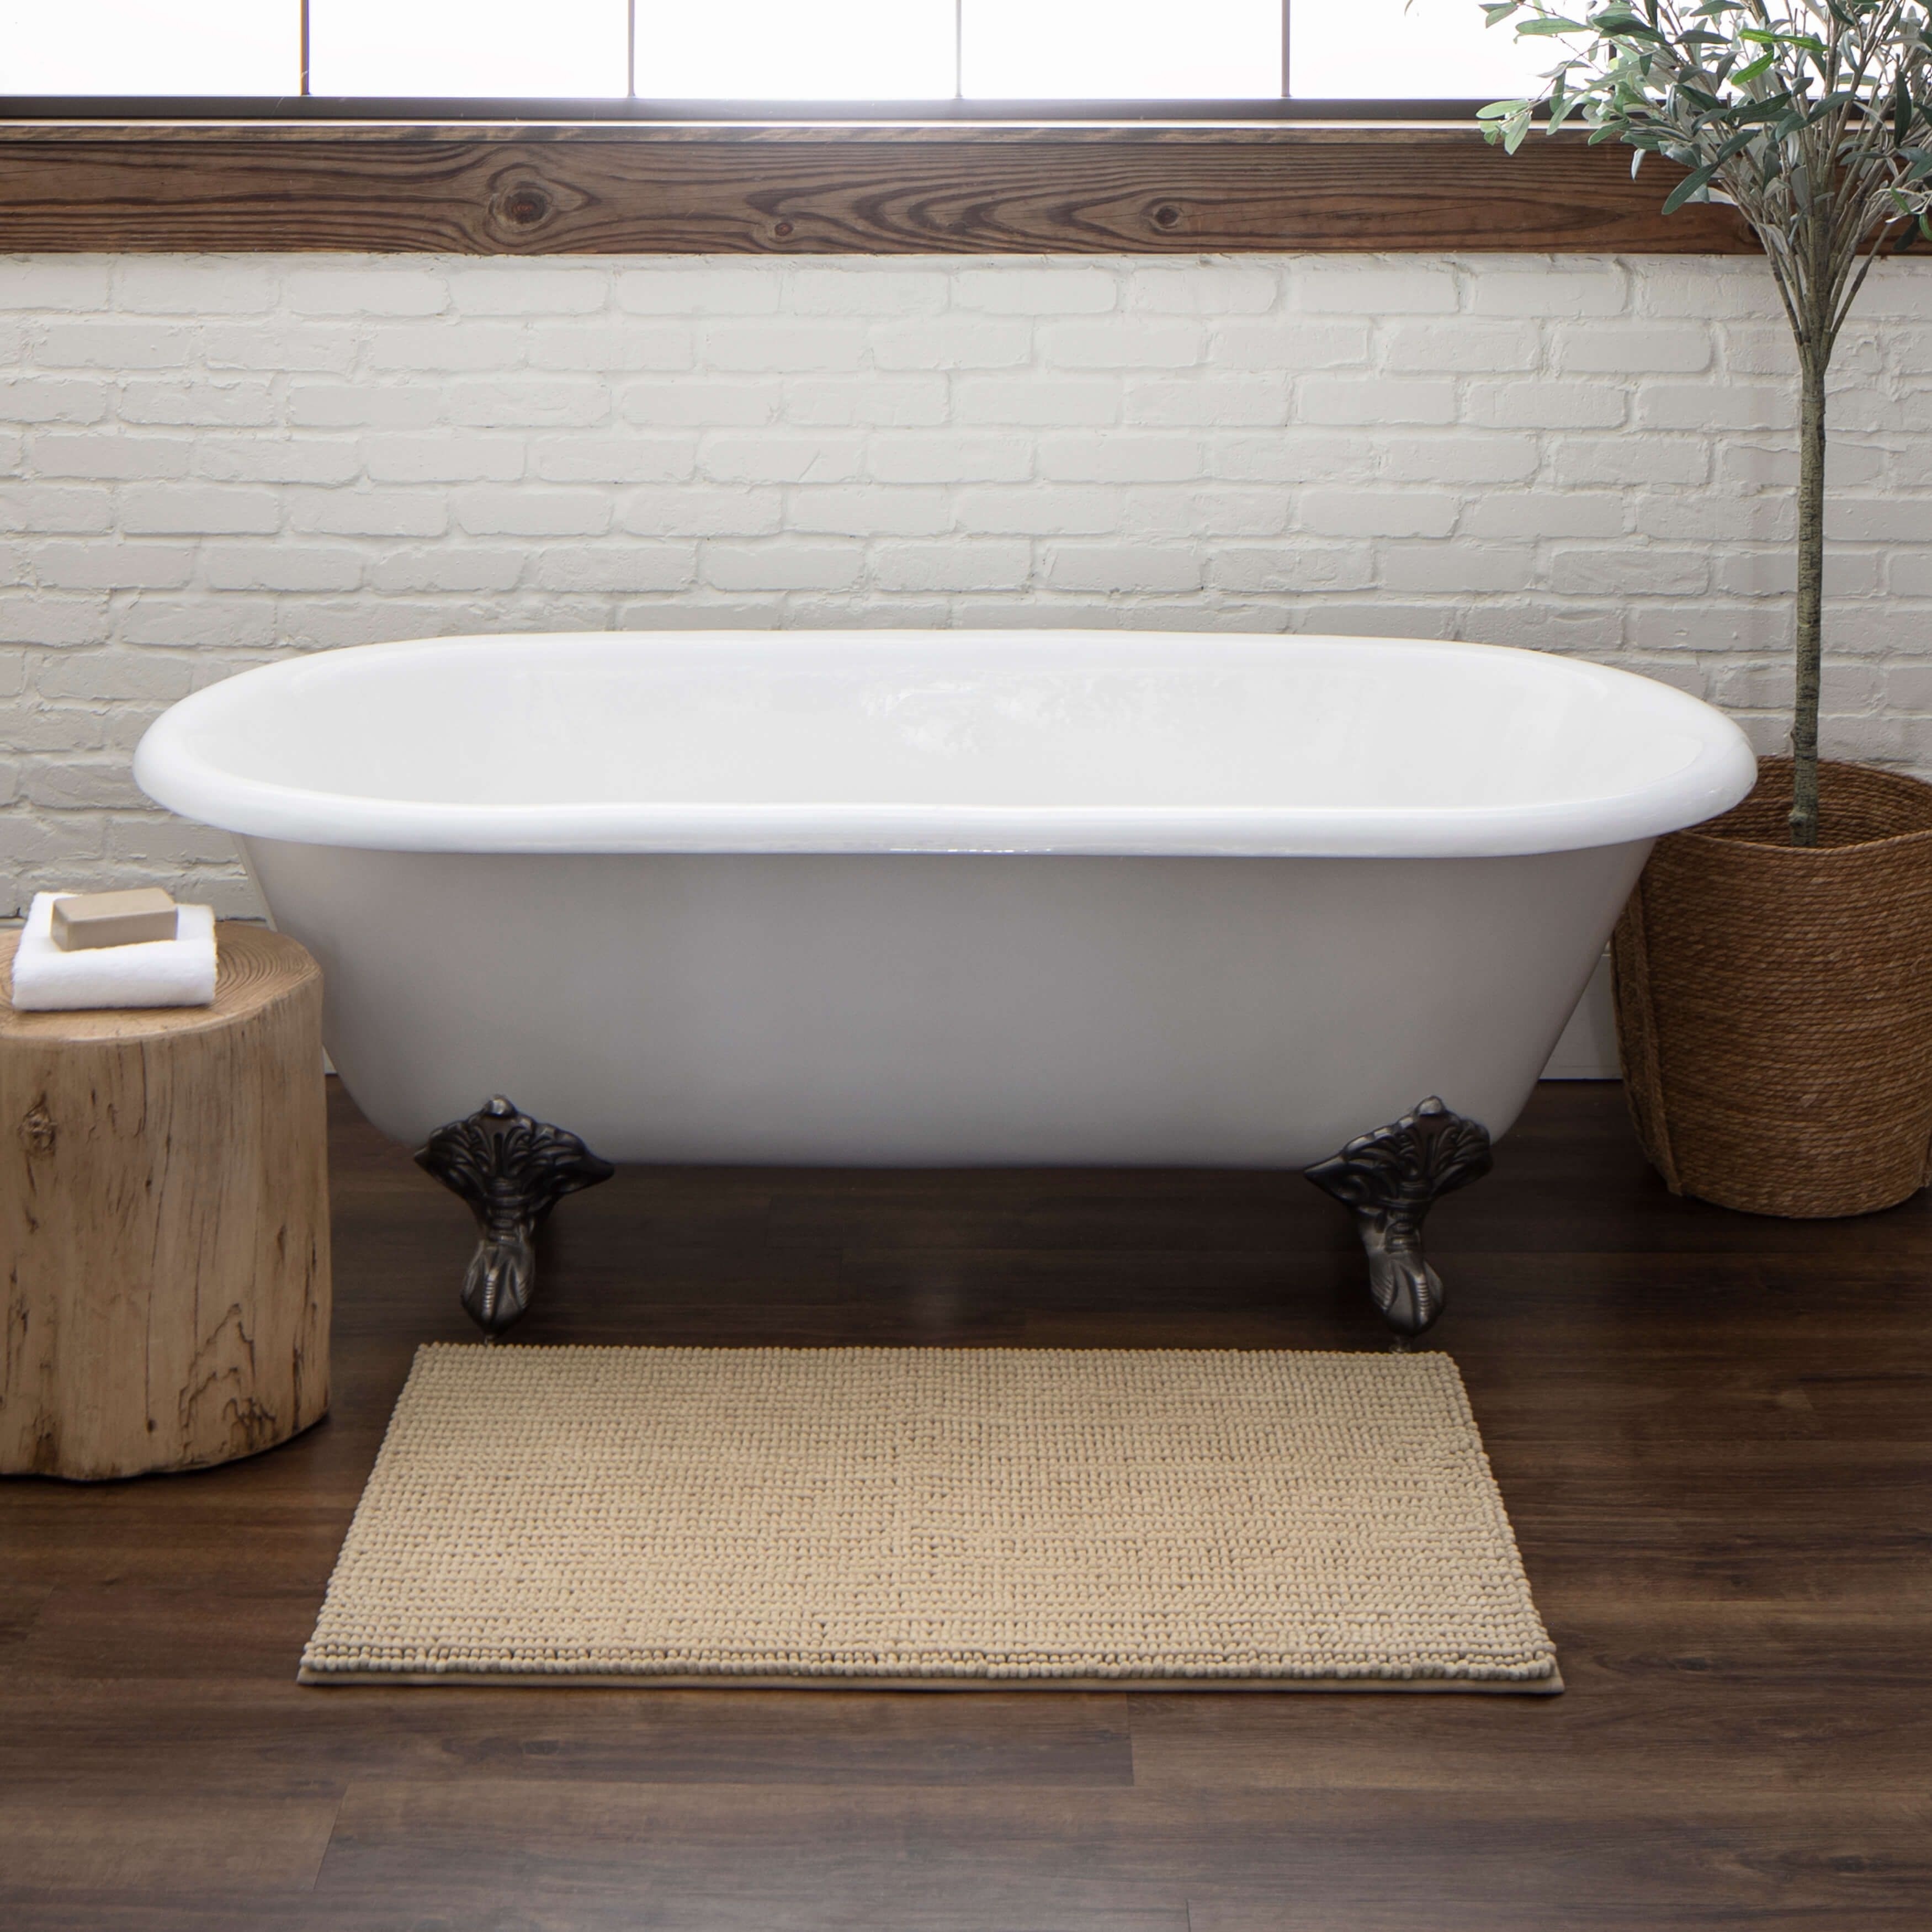 https://ak1.ostkcdn.com/images/products/is/images/direct/dd253cafec6bbf3aa41e56a7b3be31bf29ab2796/Mohawk-Home-Homespun-Noodle-Bath-Rug.jpg